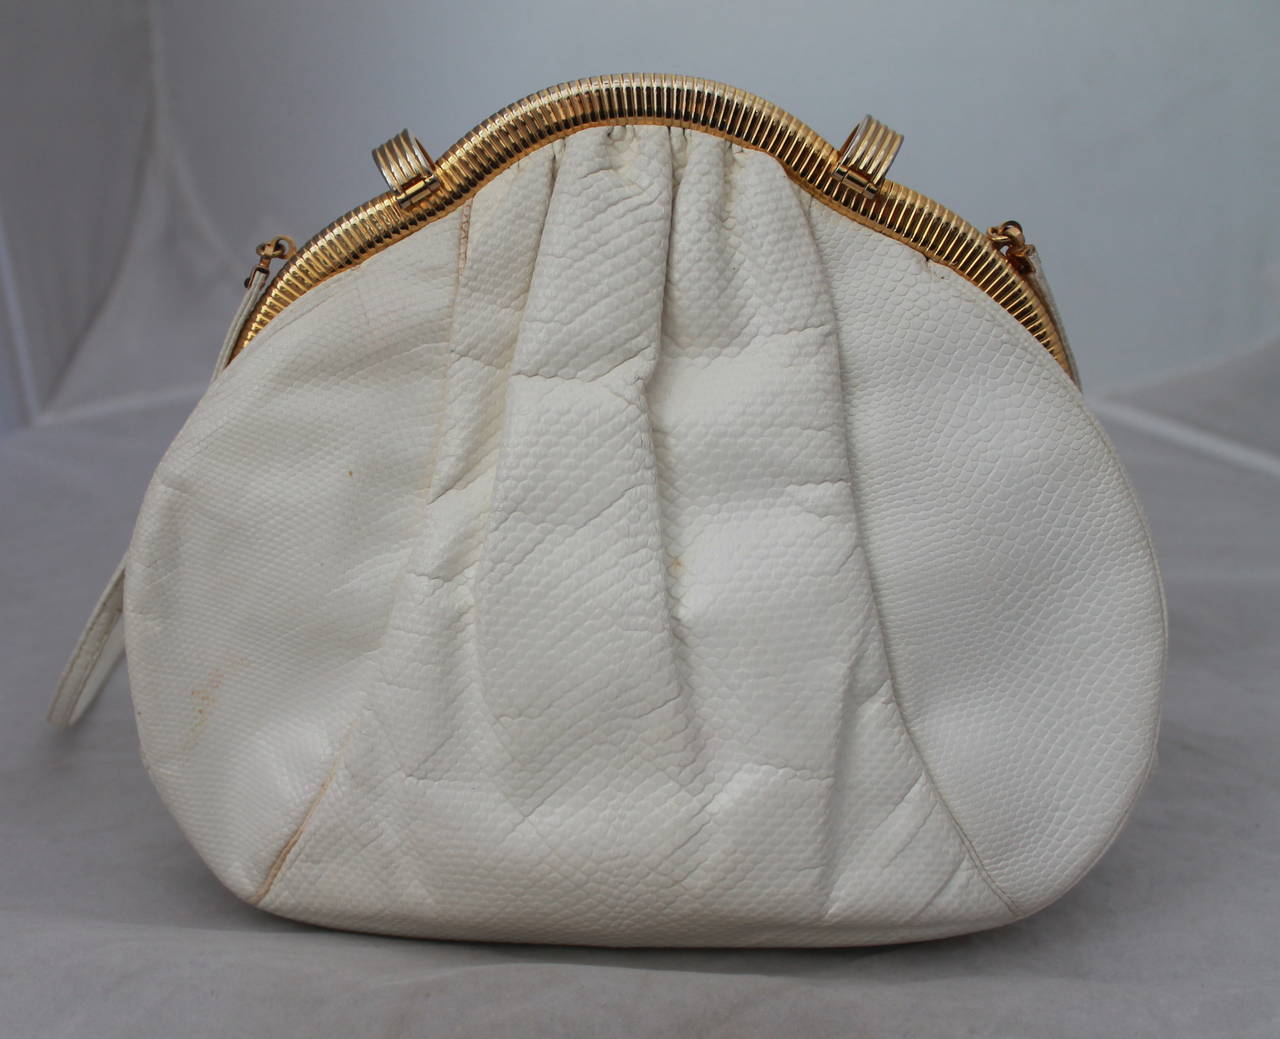 Judith Leiber 1980's White Lizard Evening Bag with Pink Stones. This bag is in good vintage condition with a couple smudges near one clasp and on the back right. It has a longer strap or can be used as a clutch.

Measurements:
Length-